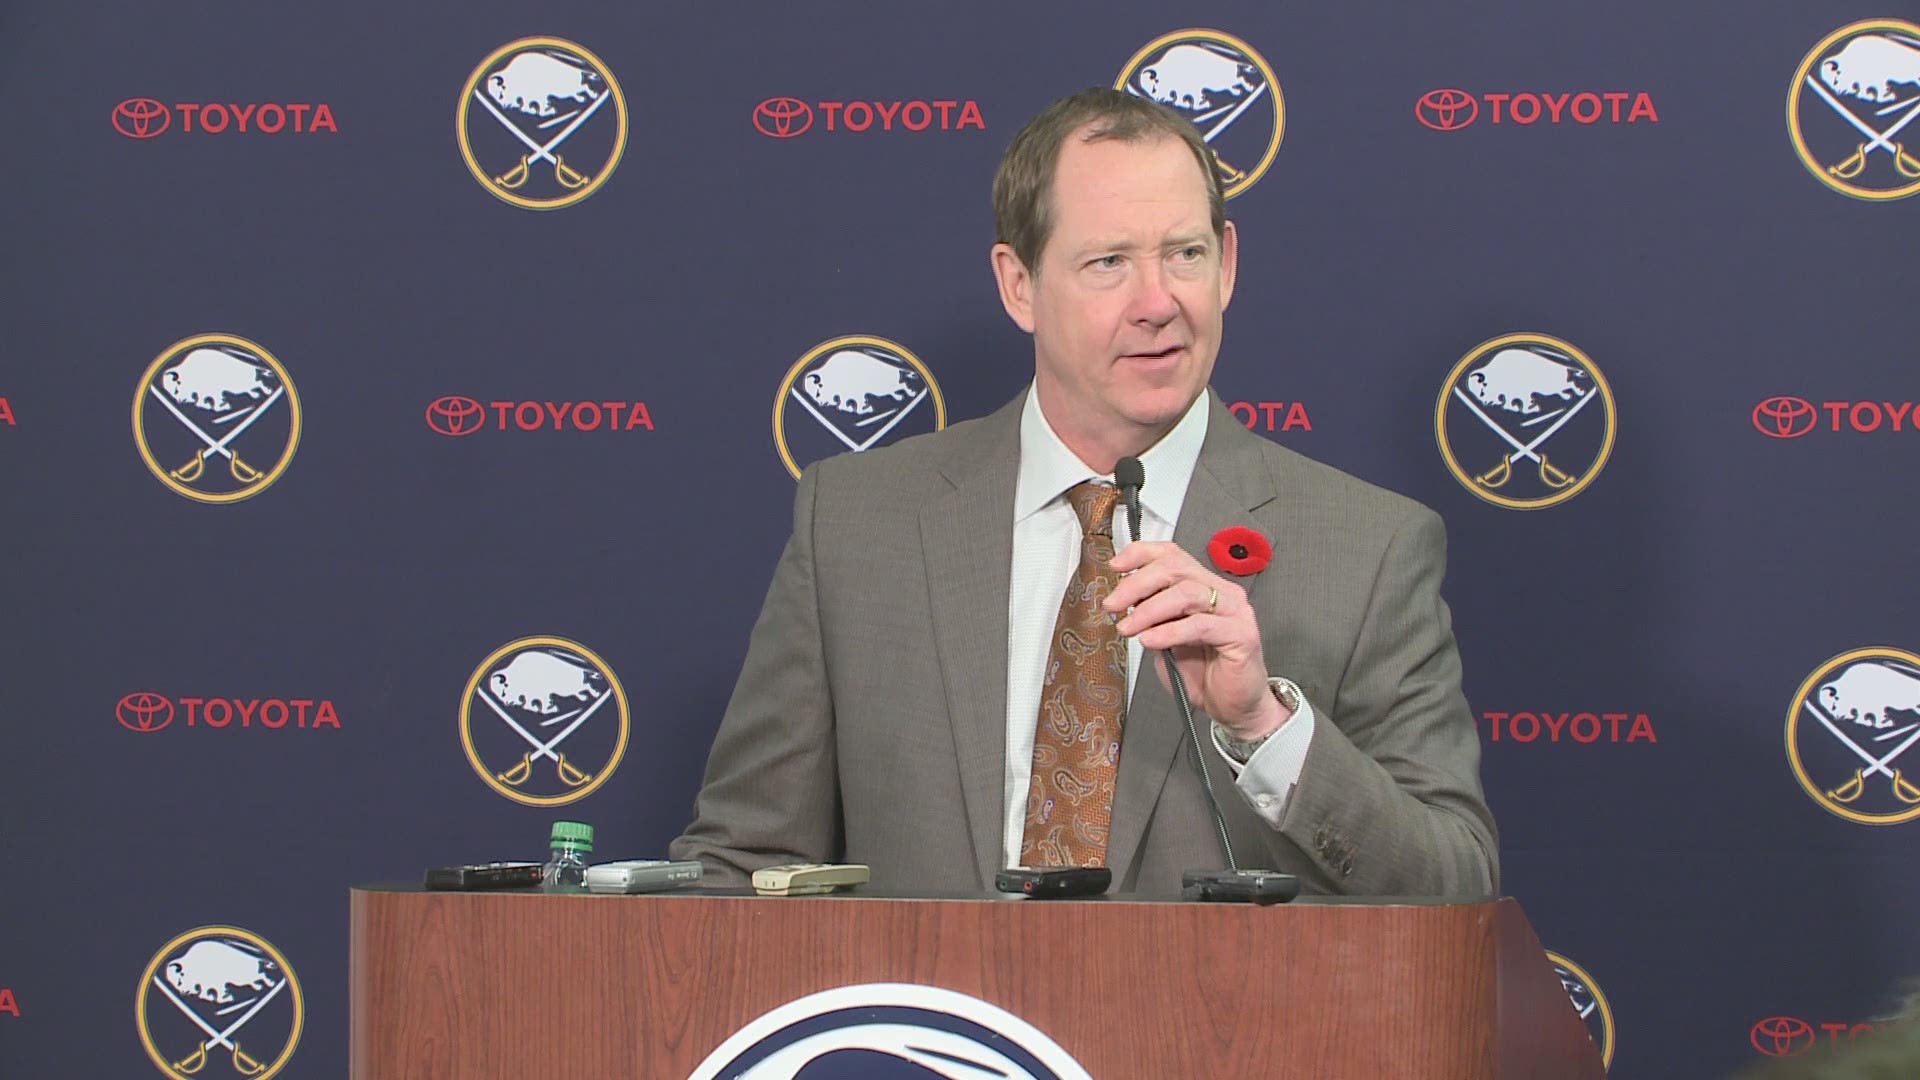 Sabres head coach Phil Housley talks about the Sabres come from behind win over Vancouver Saturday afternoon.